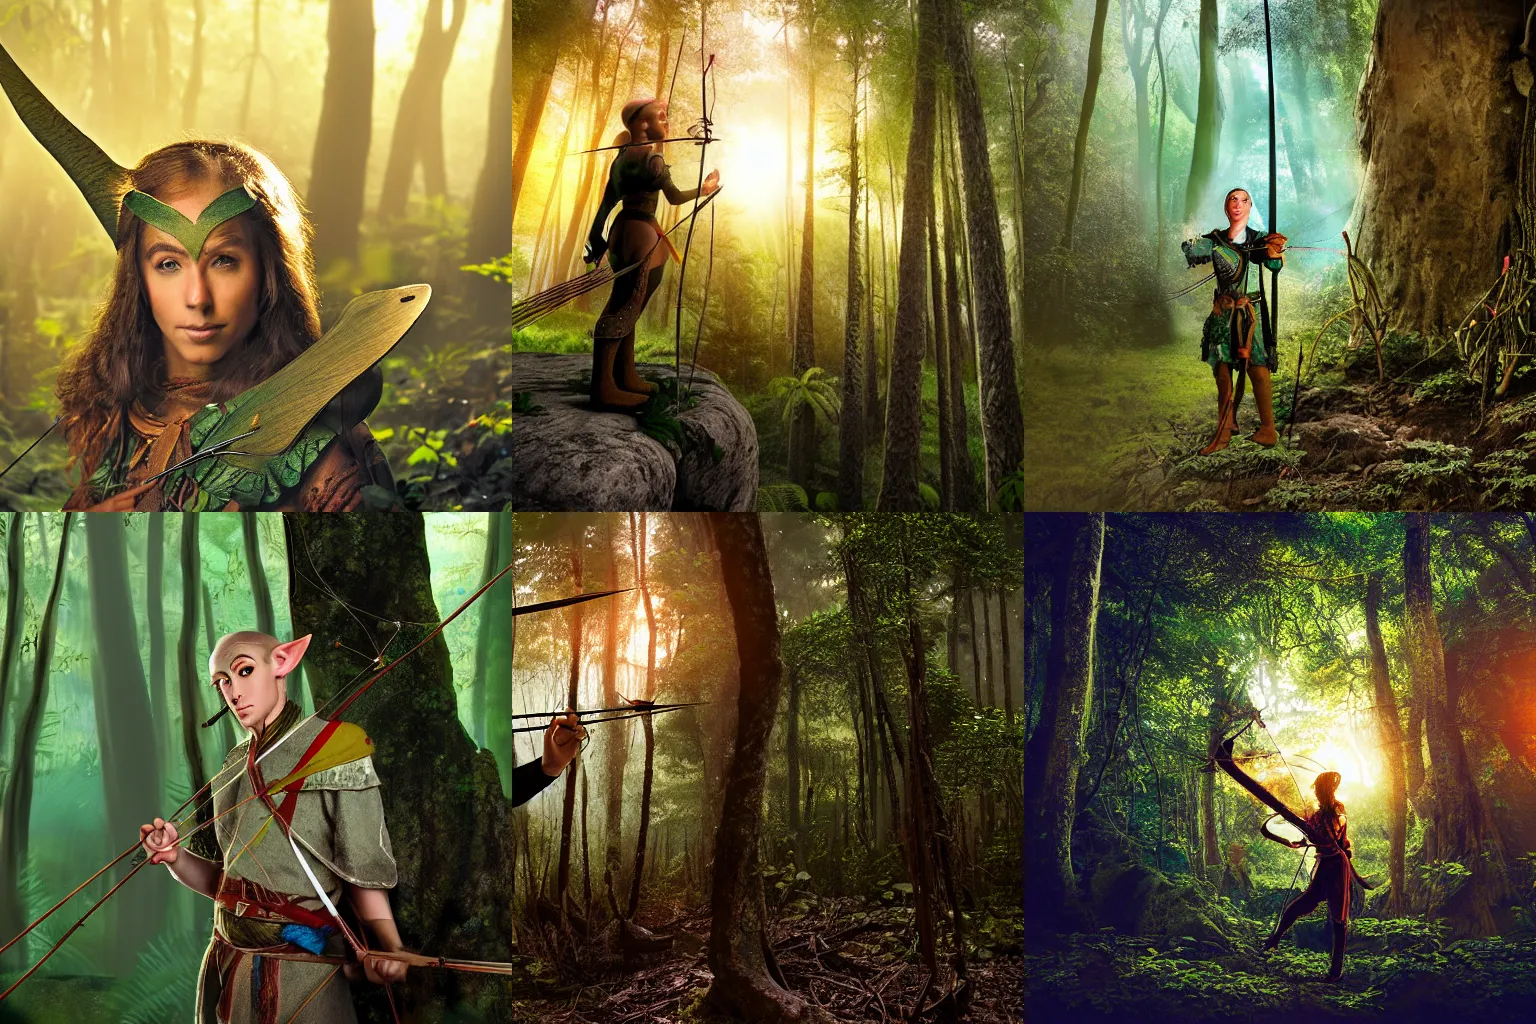 Prompt: Portrait of an elven archer exploring a Mayan forest at sunrise.